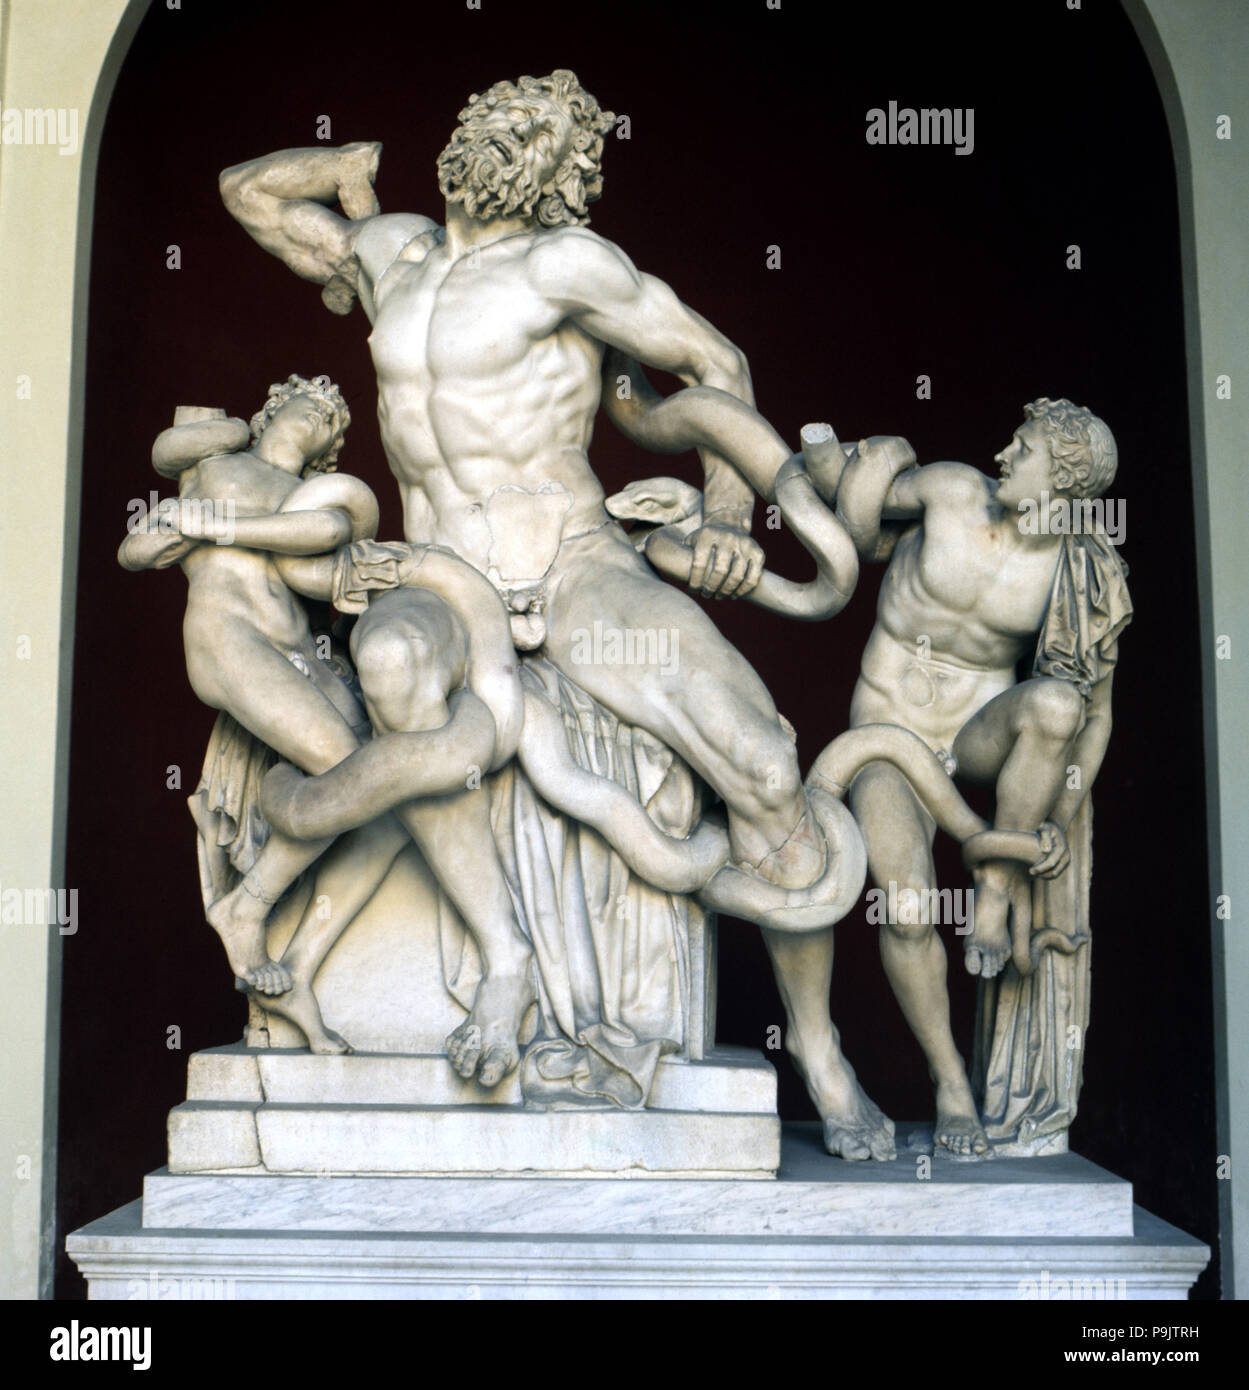 Laocoon, Greek sculpture group discovered in the Baths of Titus in 1506, restored by Michelangelo… Stock Photo